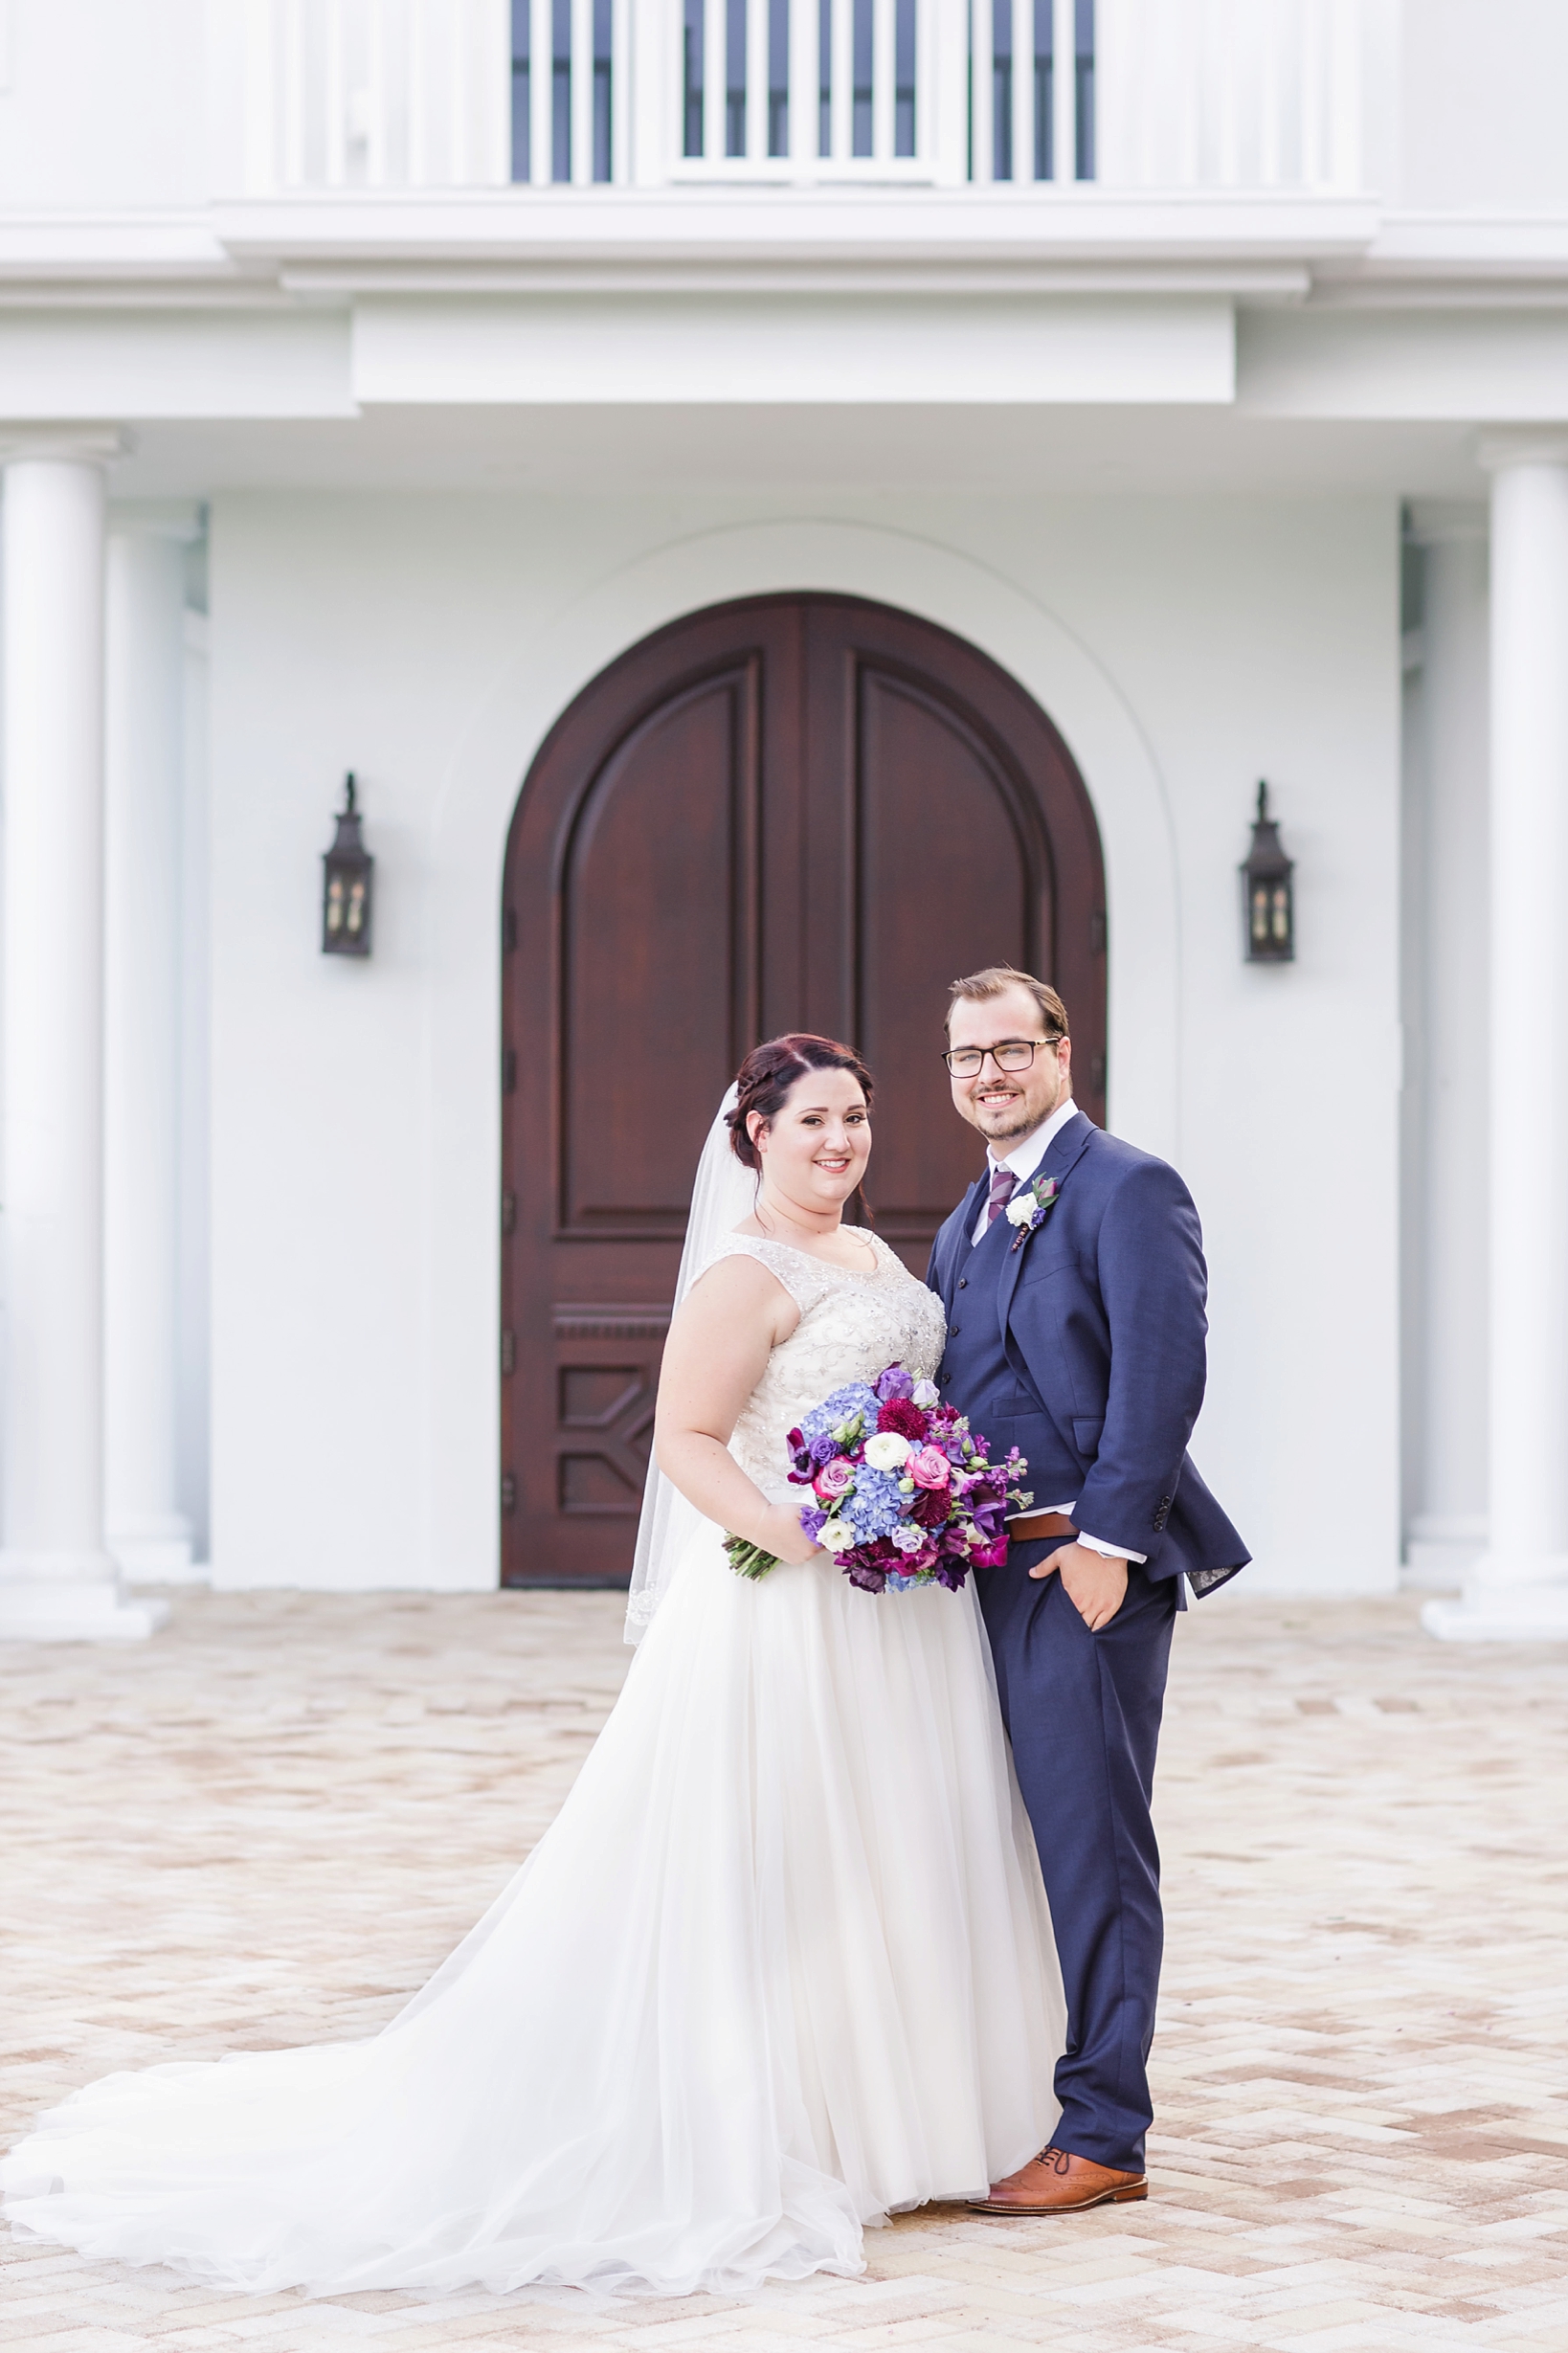 Bride and Groom in a traditional wedding pose by Sarah & Ben Photography